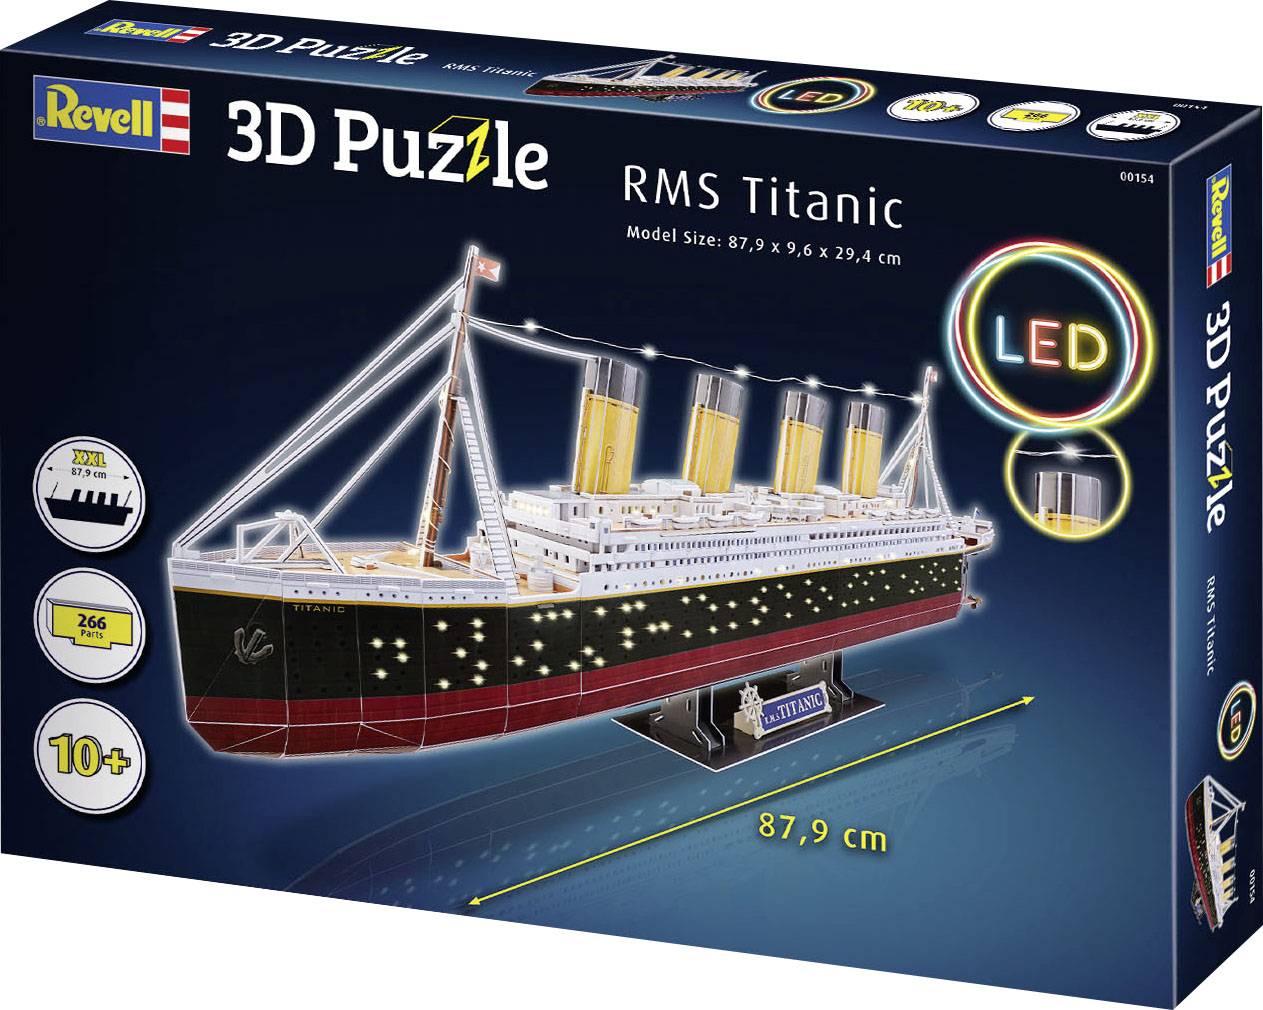 RMS Titanic LED Edition 3D Puzzle By Revell 266  foamboard pieces   RV00154 